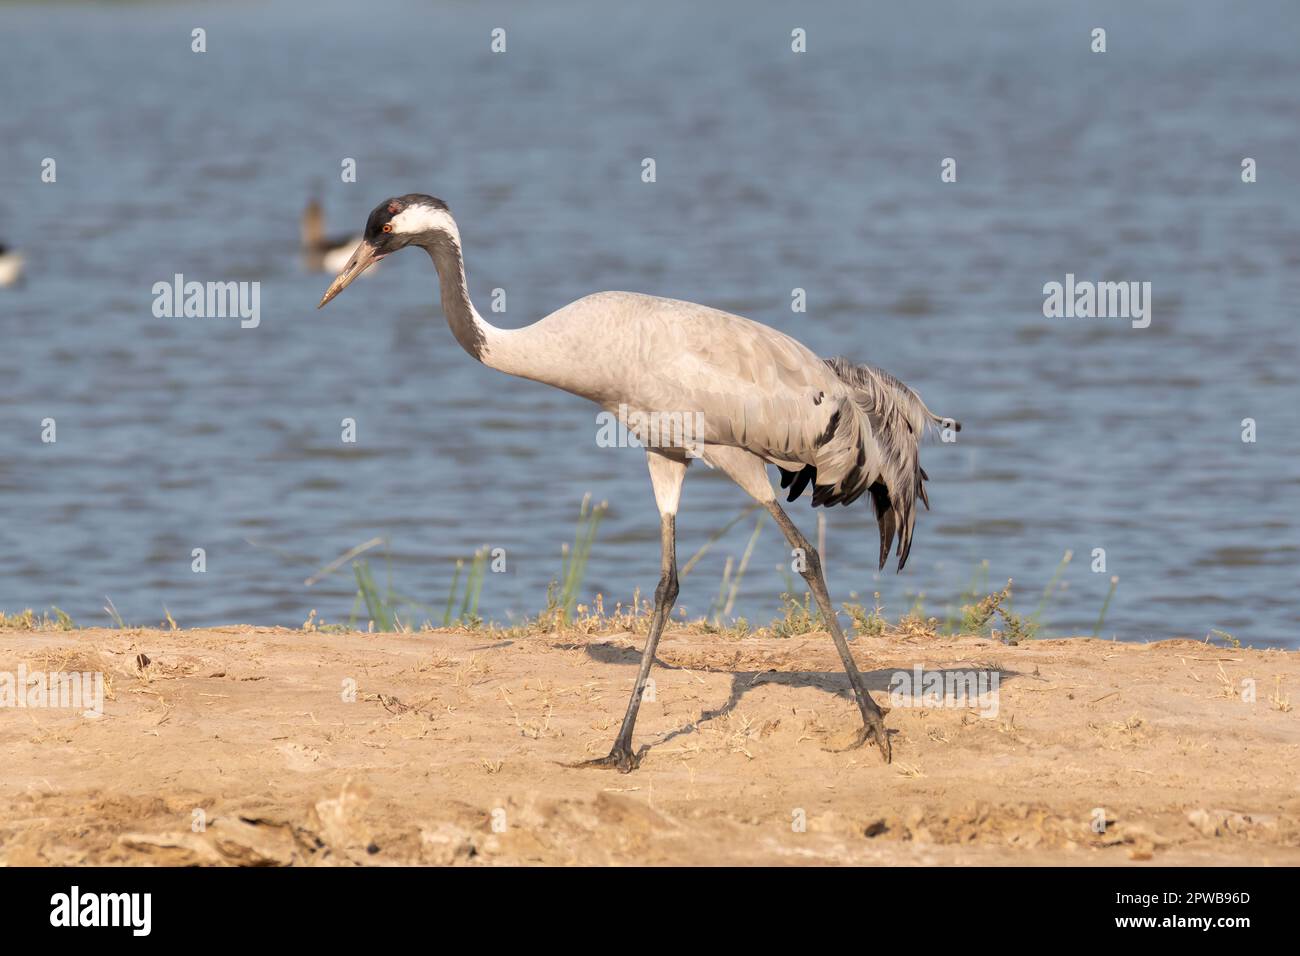 A common crane walking at the edge of a water body inside Wild Ass Sanctuary in Gujarat during a visit to the park in winter Stock Photo